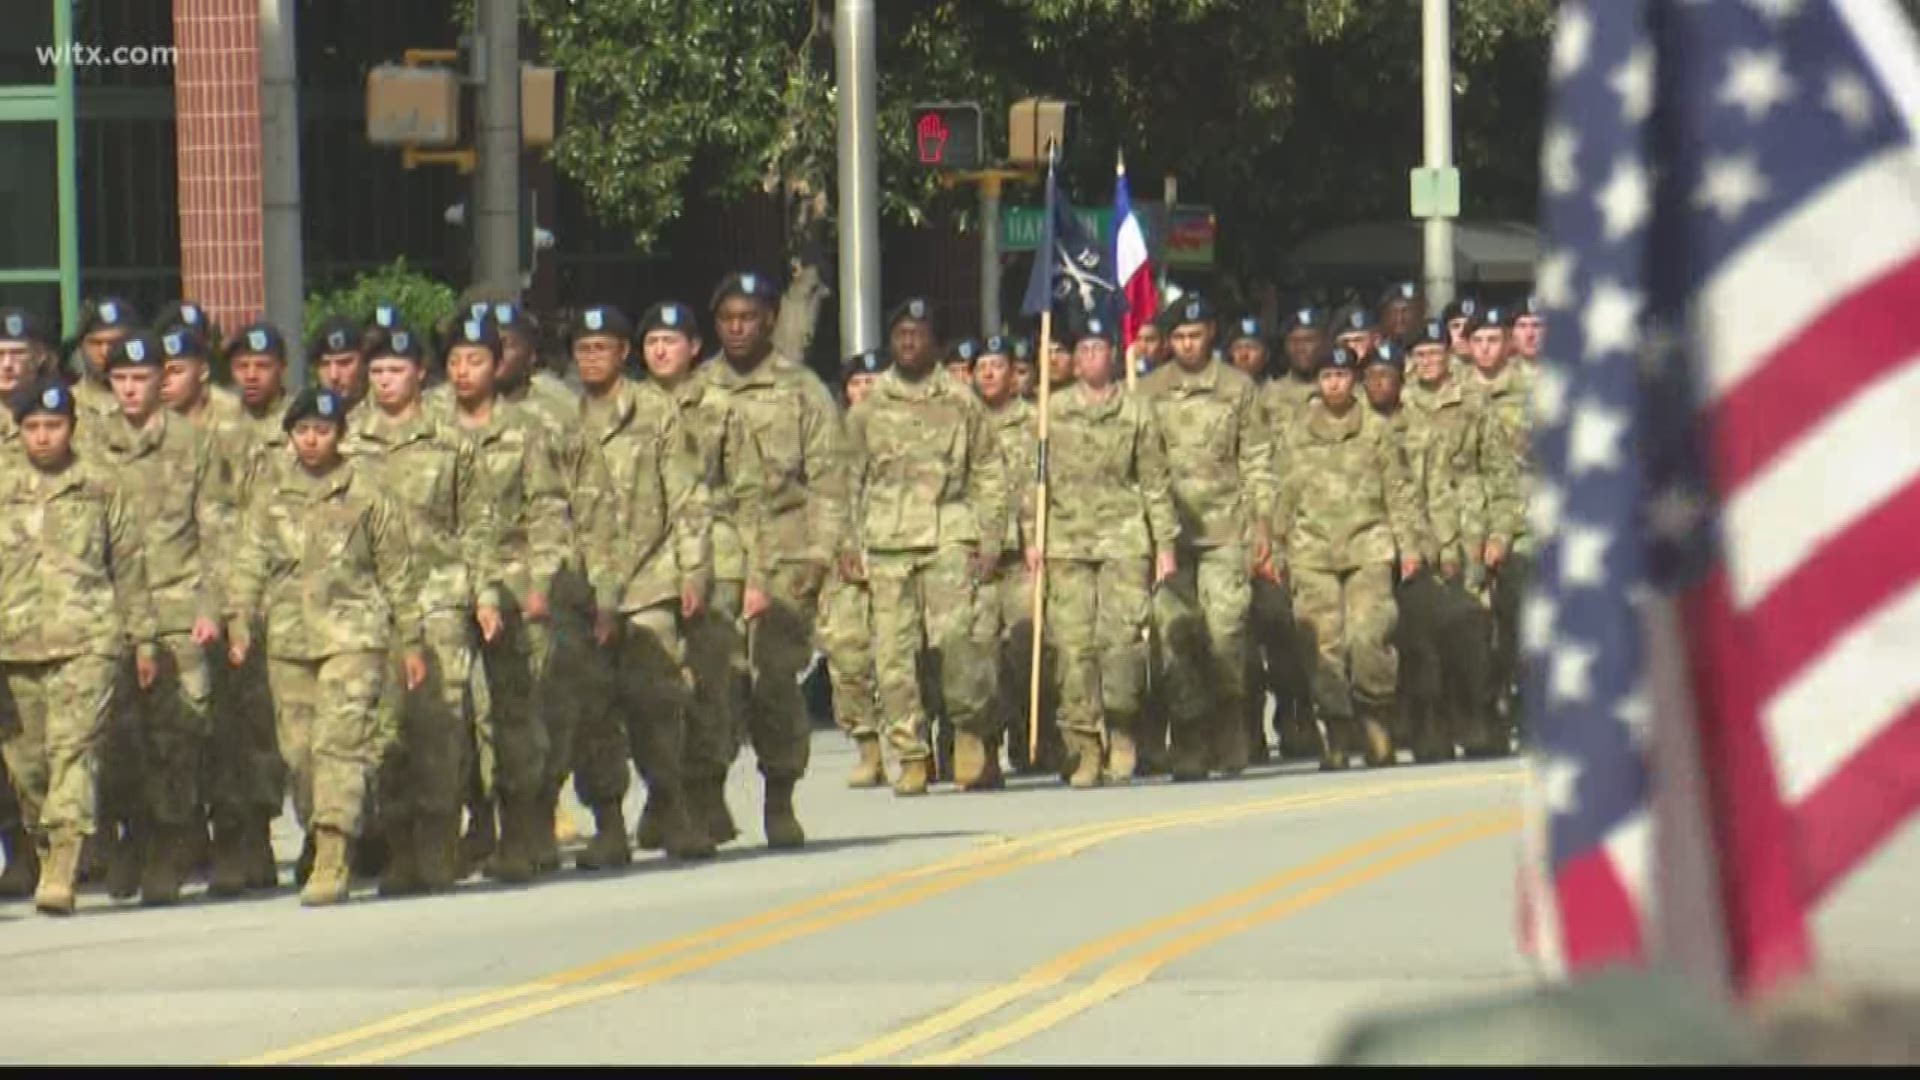 Columbia's 41st annual Veterans Day parade was an opportunity for people to honor veterans in the Midlands and across the country.